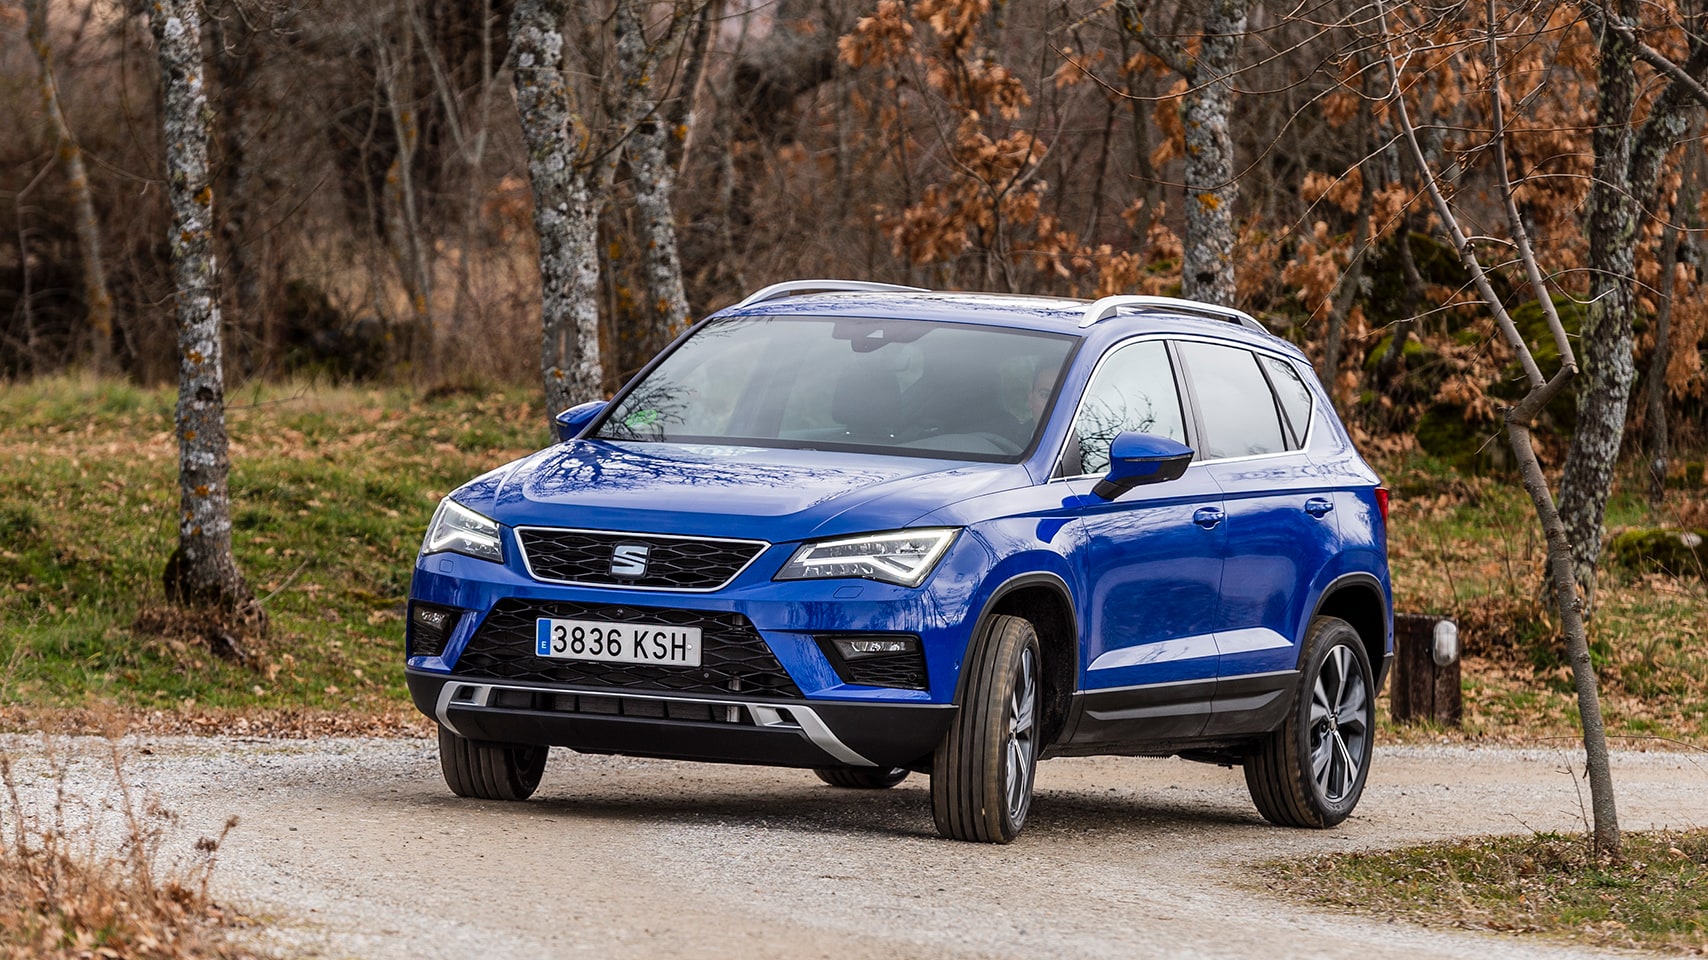 SEAT Ateca forest driving